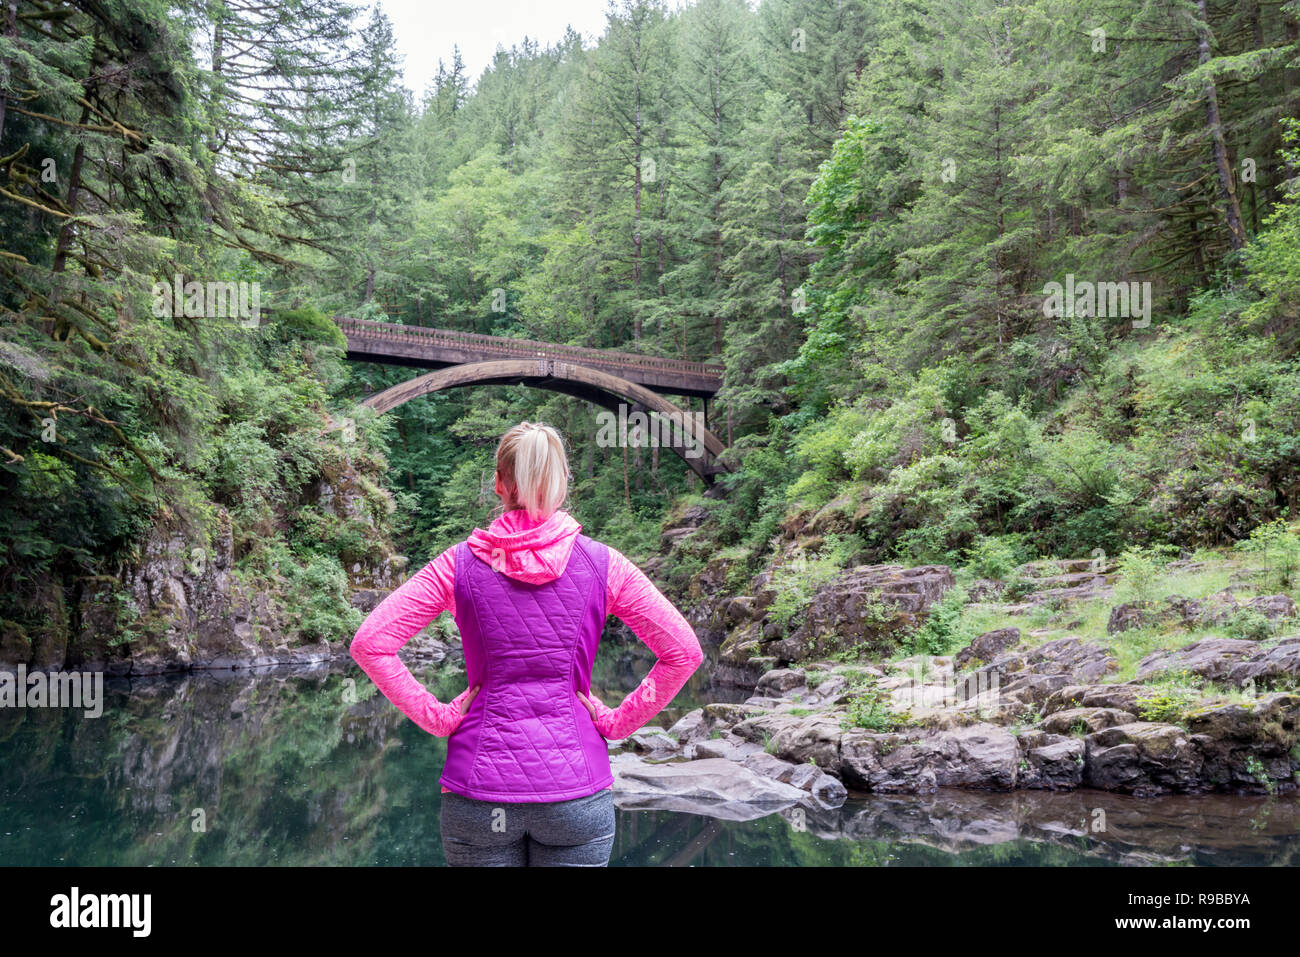 Female Hiker Looking at Bridge in Nature. Woman hiking outdoors, Active lifestyle concept. Stock Photo